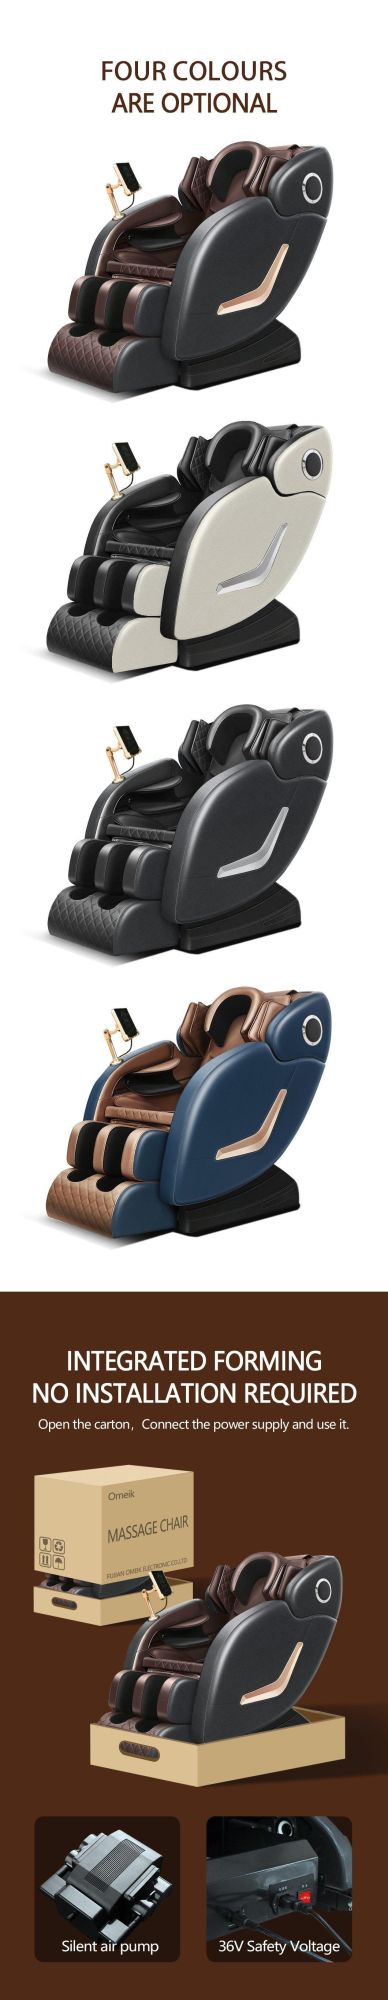 Wholesale Cheap Hot Selling Luxury High Quality Full Body Massage Music Best Massage Chair with China Supplier